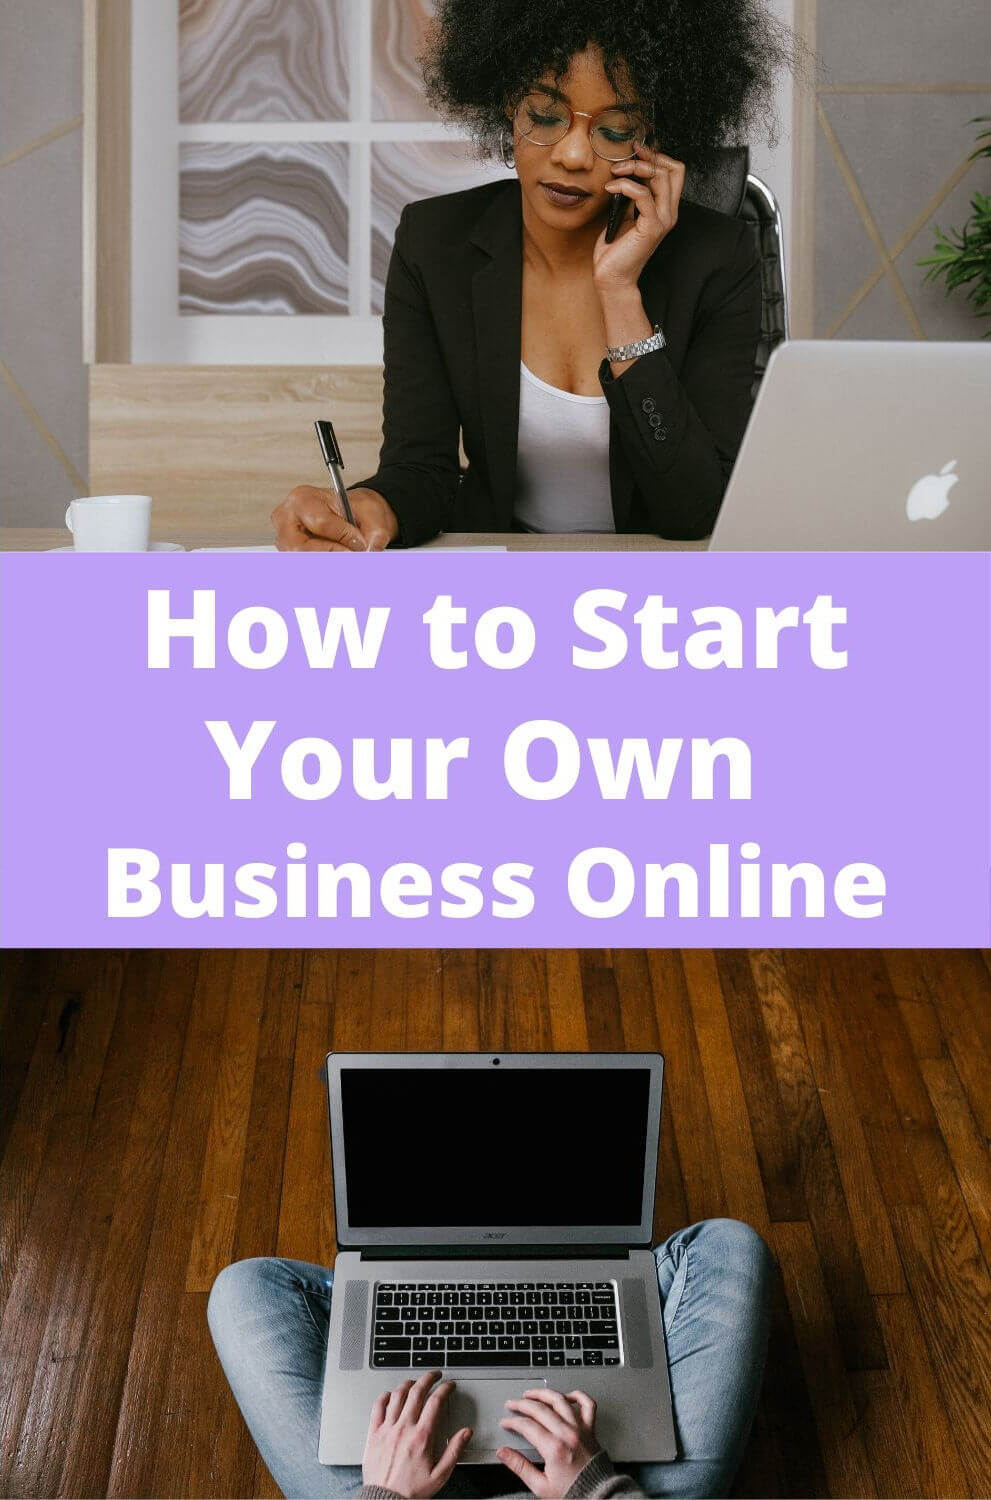 How to Start Your Onw Business Online